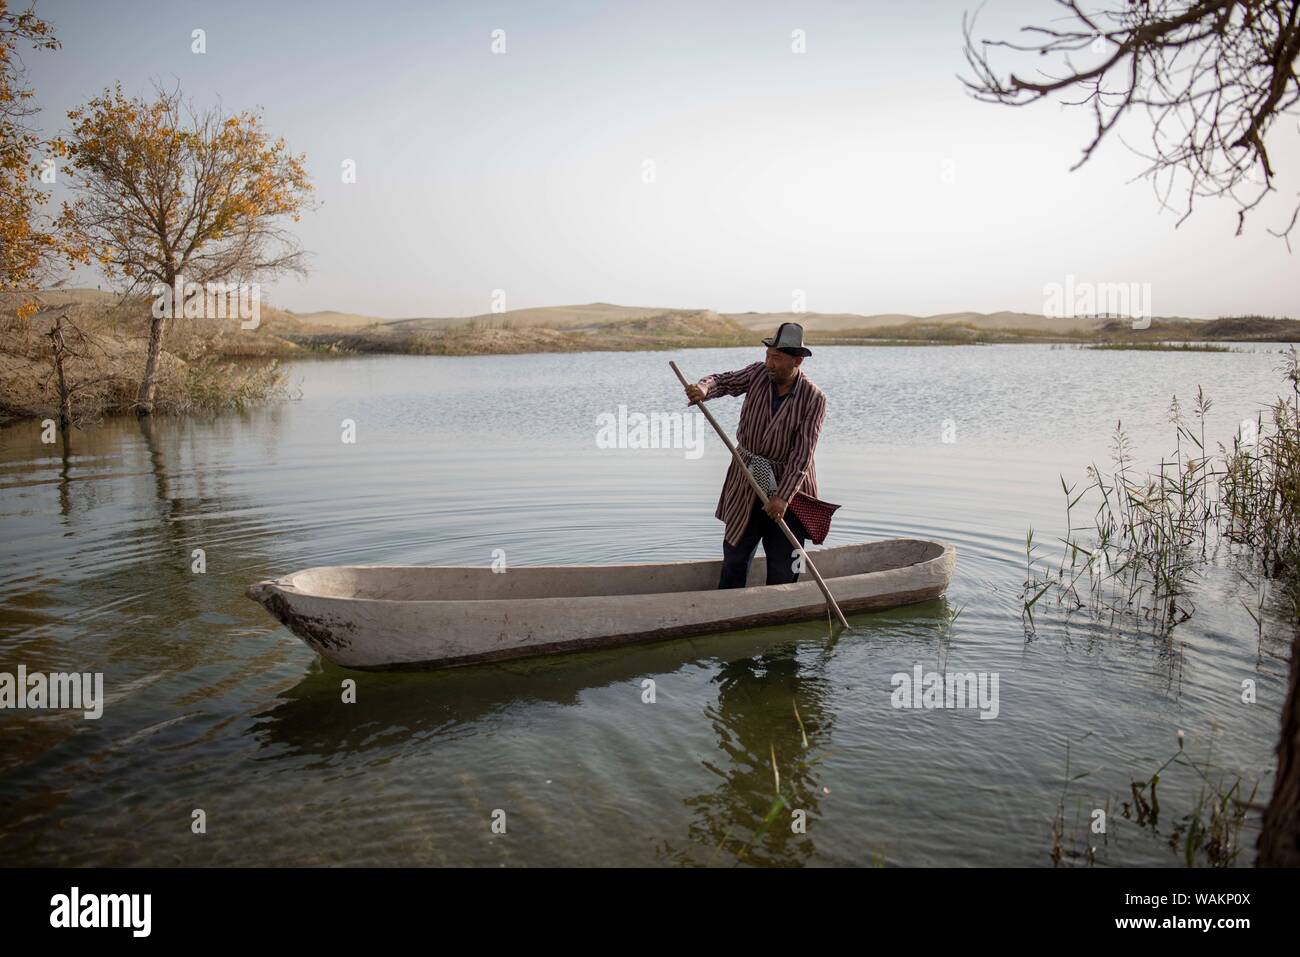 (190821) -- YULI, Aug. 21, 2019 (Xinhua) -- Amudun Abudu rows a canoe for fishing in Lop Nur People Village in Yuli County, northwest China's Xinjiang Uygur Autonomous Region, Oct. 16, 2018. Lop Nur People Village is located in Yuli County, where Tarim River flows through the deserts with populus euphratica forests' reflection on the shimmering waves. Amudun Abudu, a 61-year old typical Lop Nur villager, works in local tourism industry. With the changes of the times, many Lop Nur people have various options for a living, yet he insists on the tradition of fishing in rivers and lakes. Not on Stock Photo